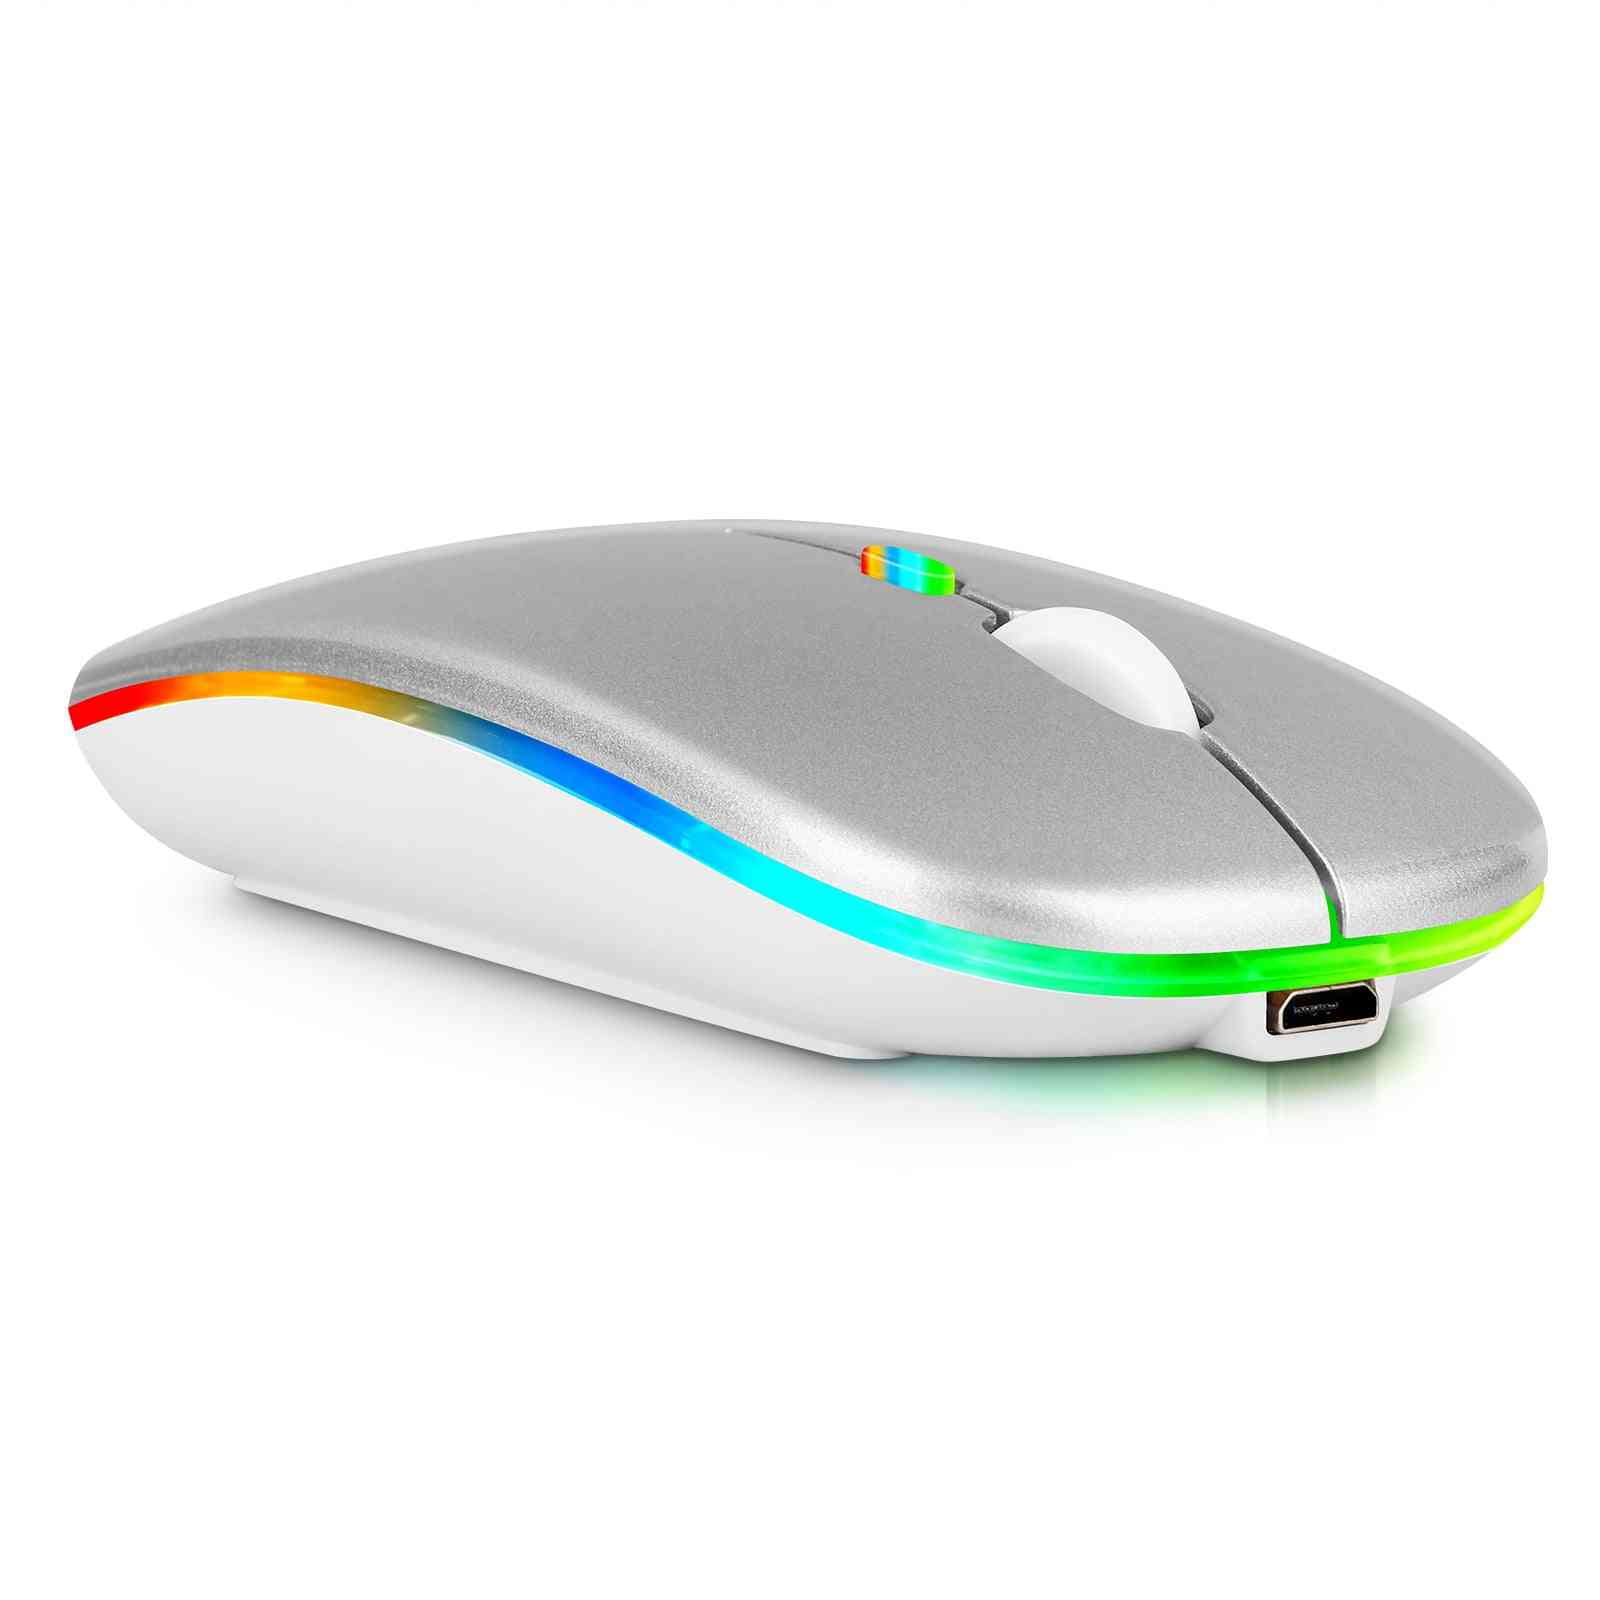 2.4GHz & Bluetooth Mouse, Rechargeable Wireless LED Mouse for Xiaomi Redmi K50 Gaming ALso Compatible with TV / Laptop / PC / / iPad pro / Computer / Tablet / Android Silver - Walmart.com